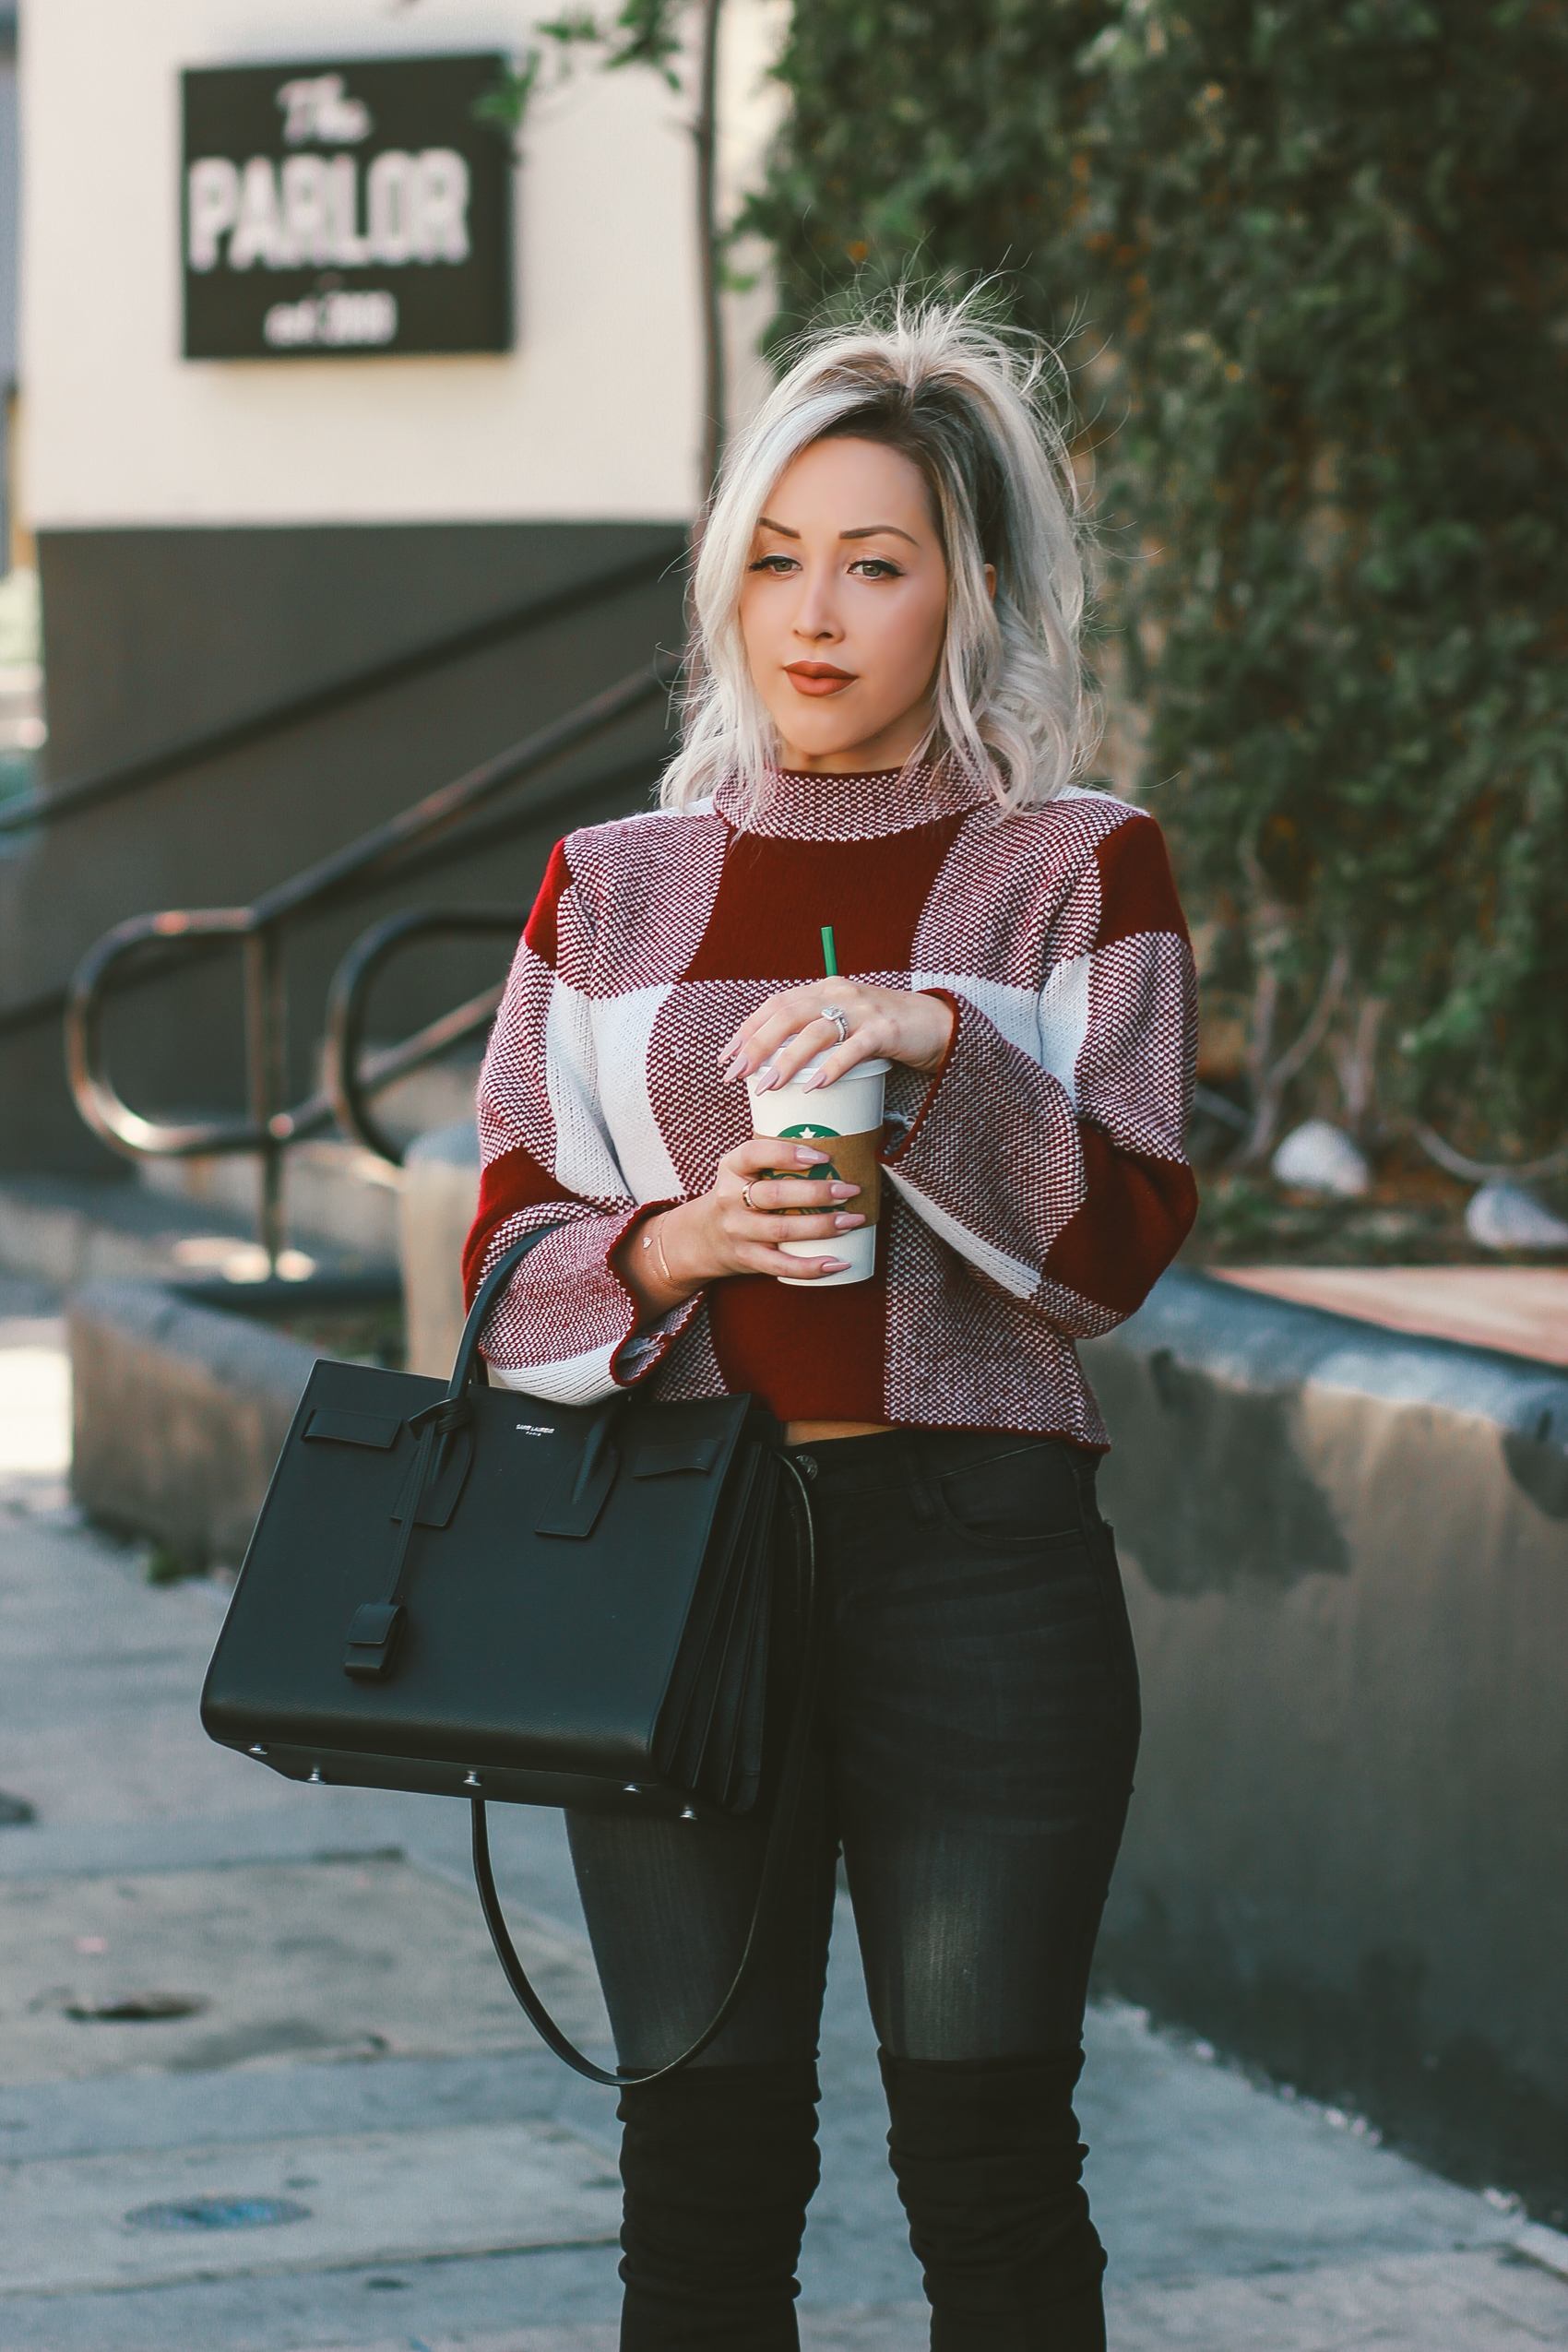 Gingham Cropped Sweater |Black Thigh High Boots, Black Saint Laurent Sac De Jour | Blondie in the City by Hayley Larue